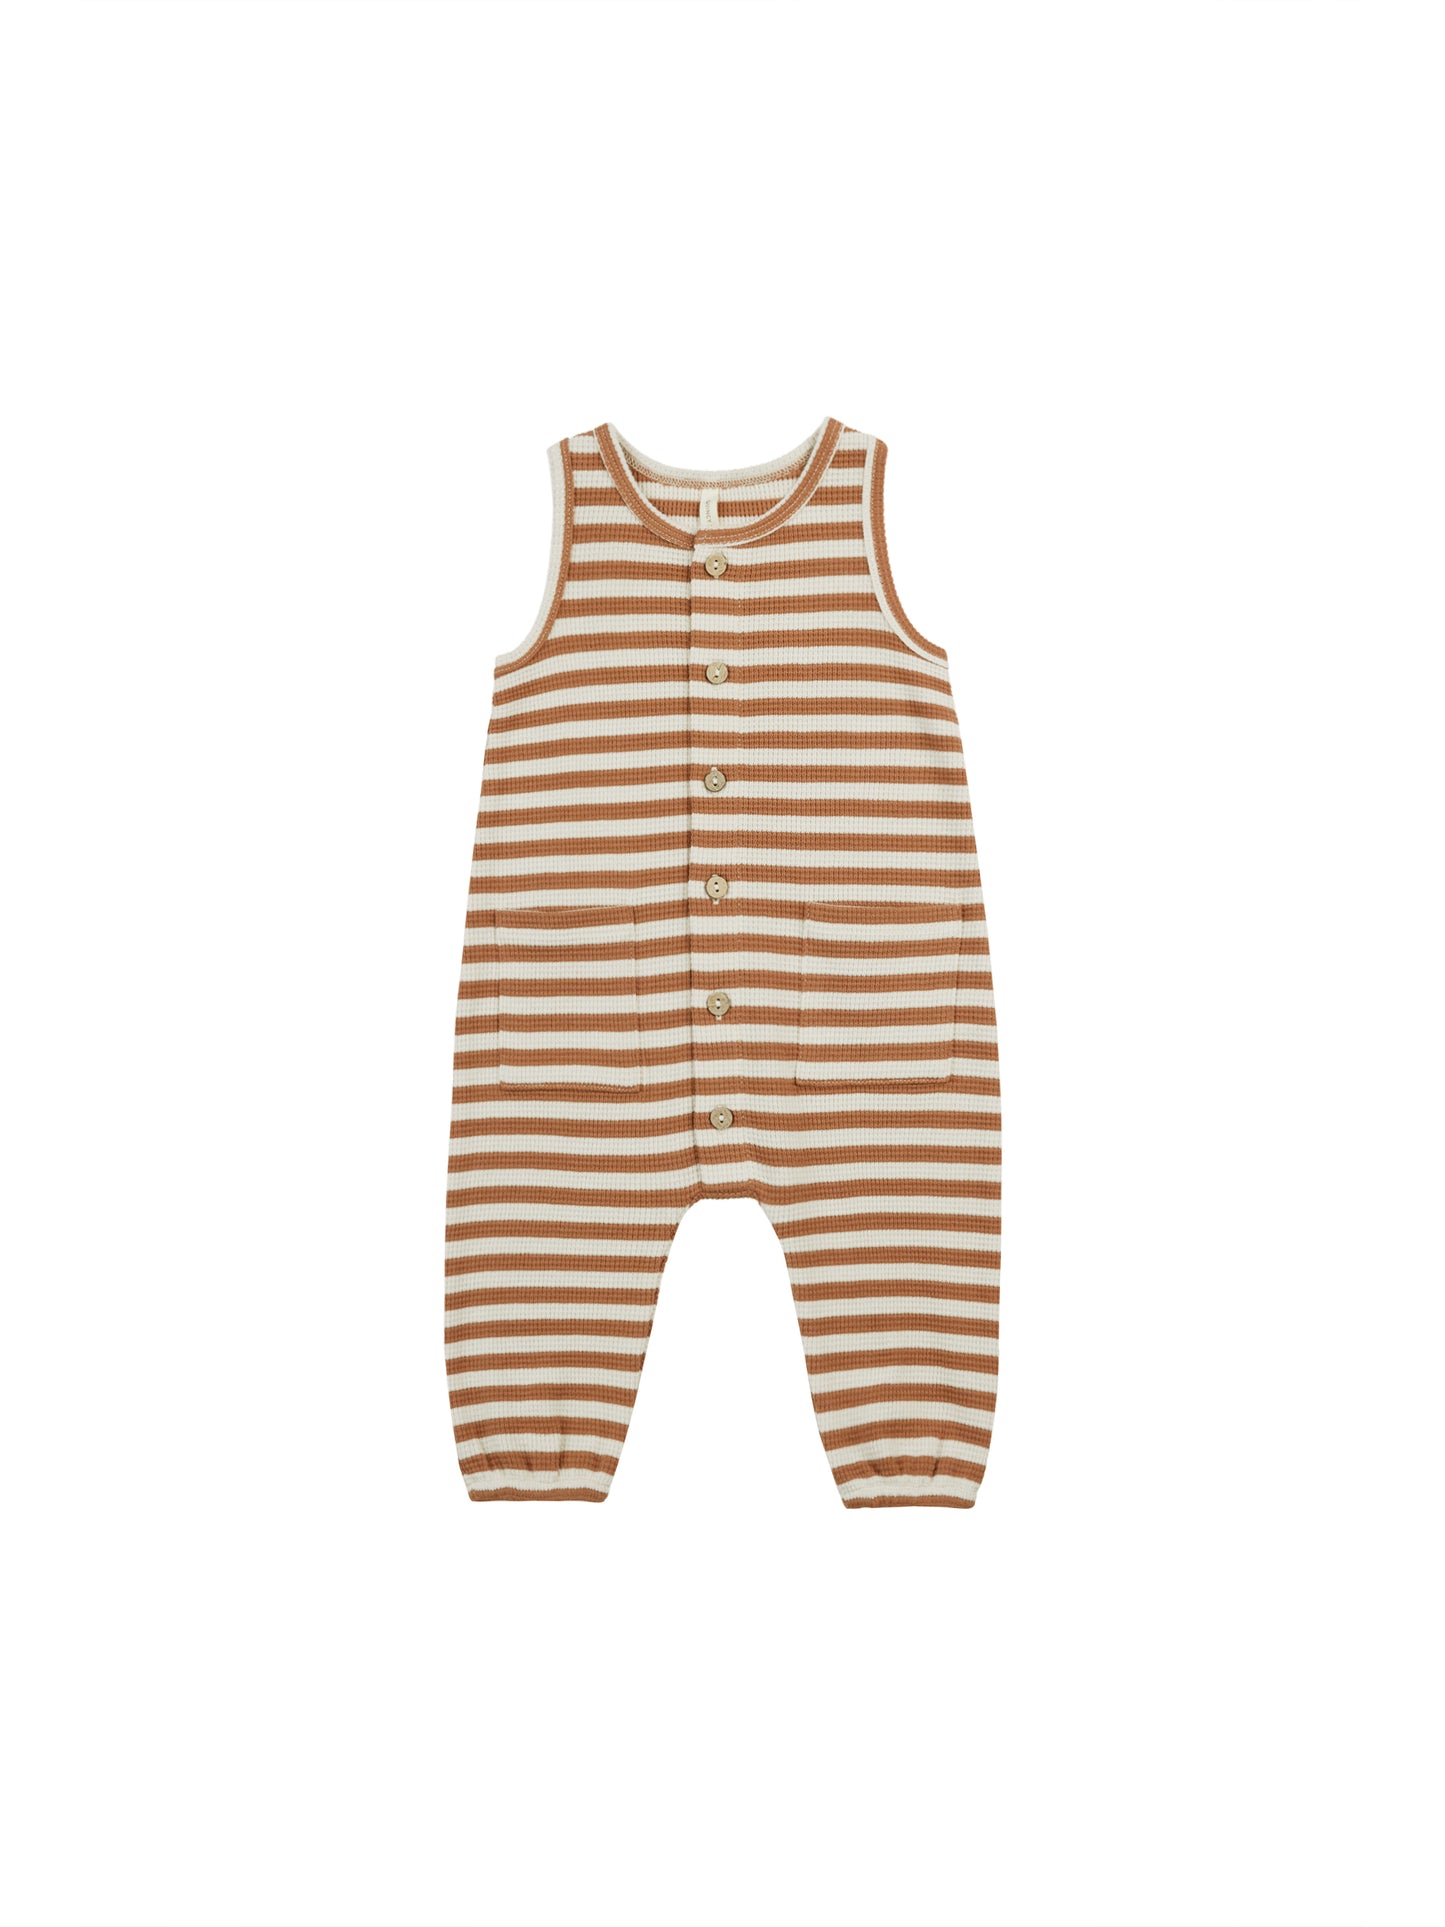 QUINCY MAE WAFFLE JUMPSUIT - CLAY STRIPE